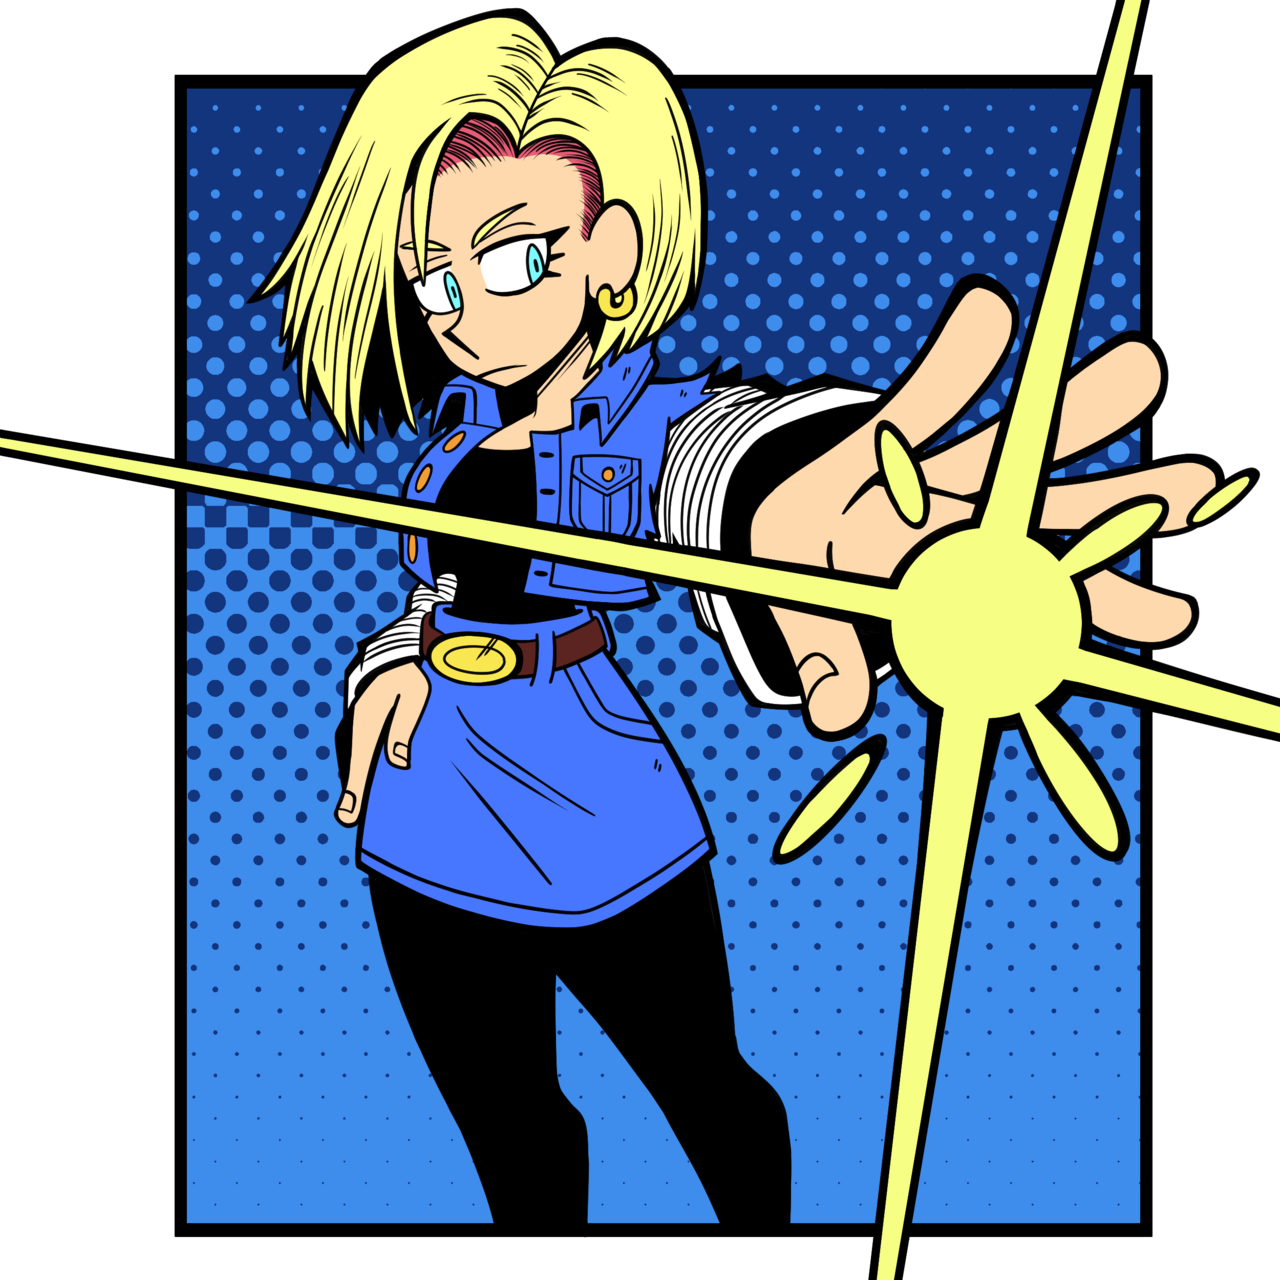 1nsert-art-here:Been playing Fighterz in my spare time, have an Android 18 &lt;3